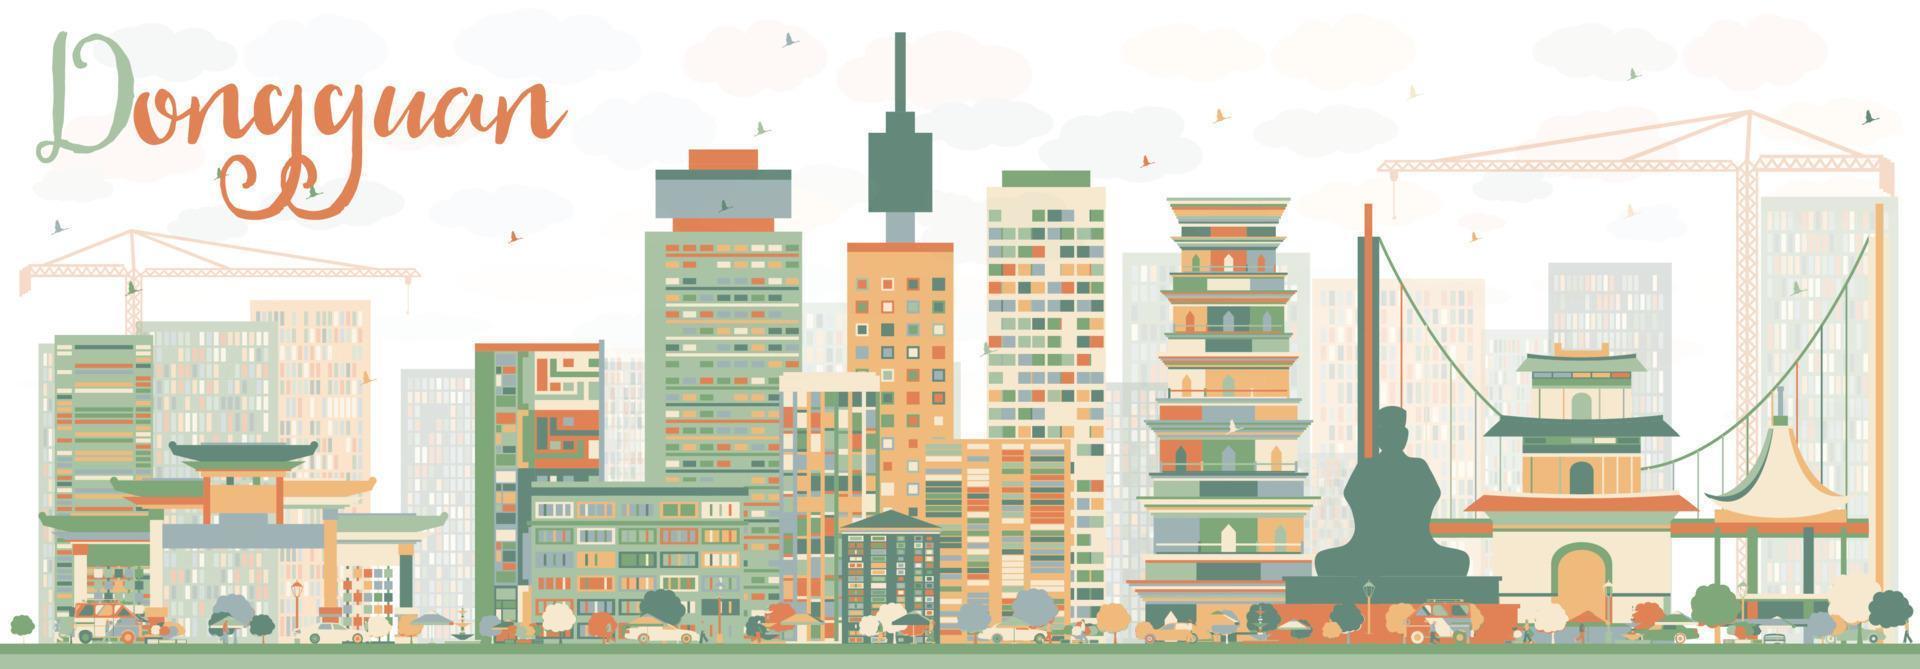 Abstract Dongguan Skyline with Color Buildings. vector